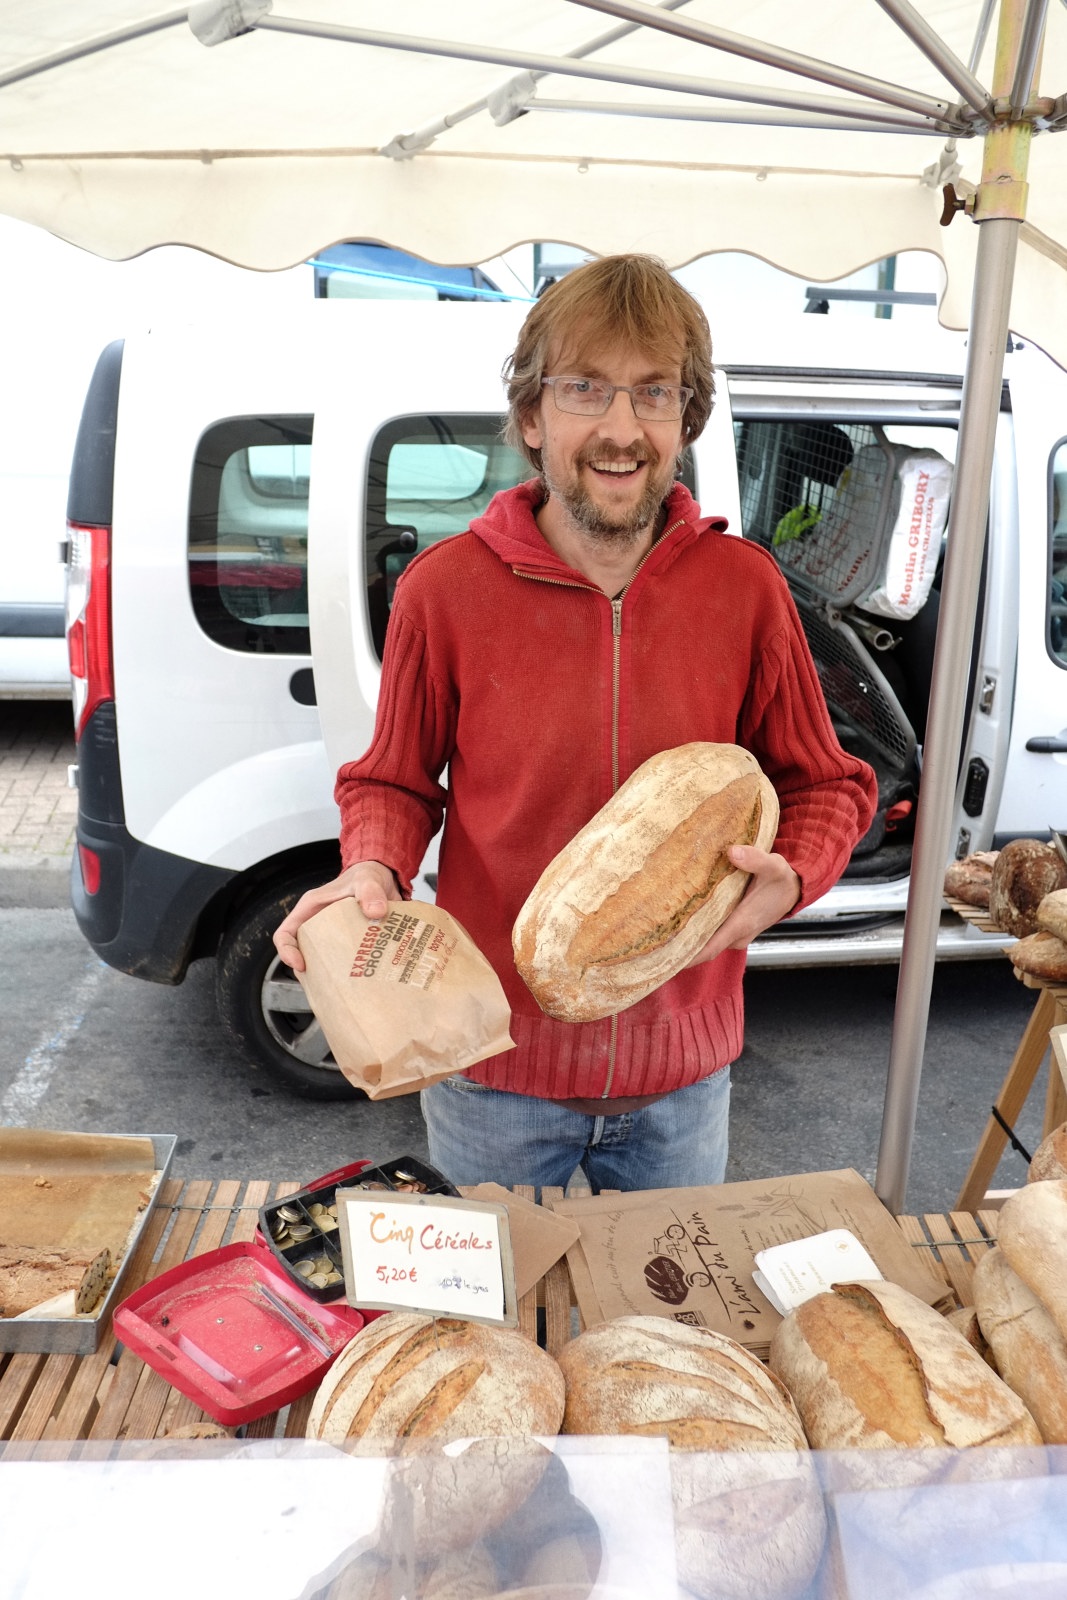 Portrait of our artisanal bread vendor, market day in Le Bois-d'Oingt. Food and travel lifestyle photography by Kent Johnson.